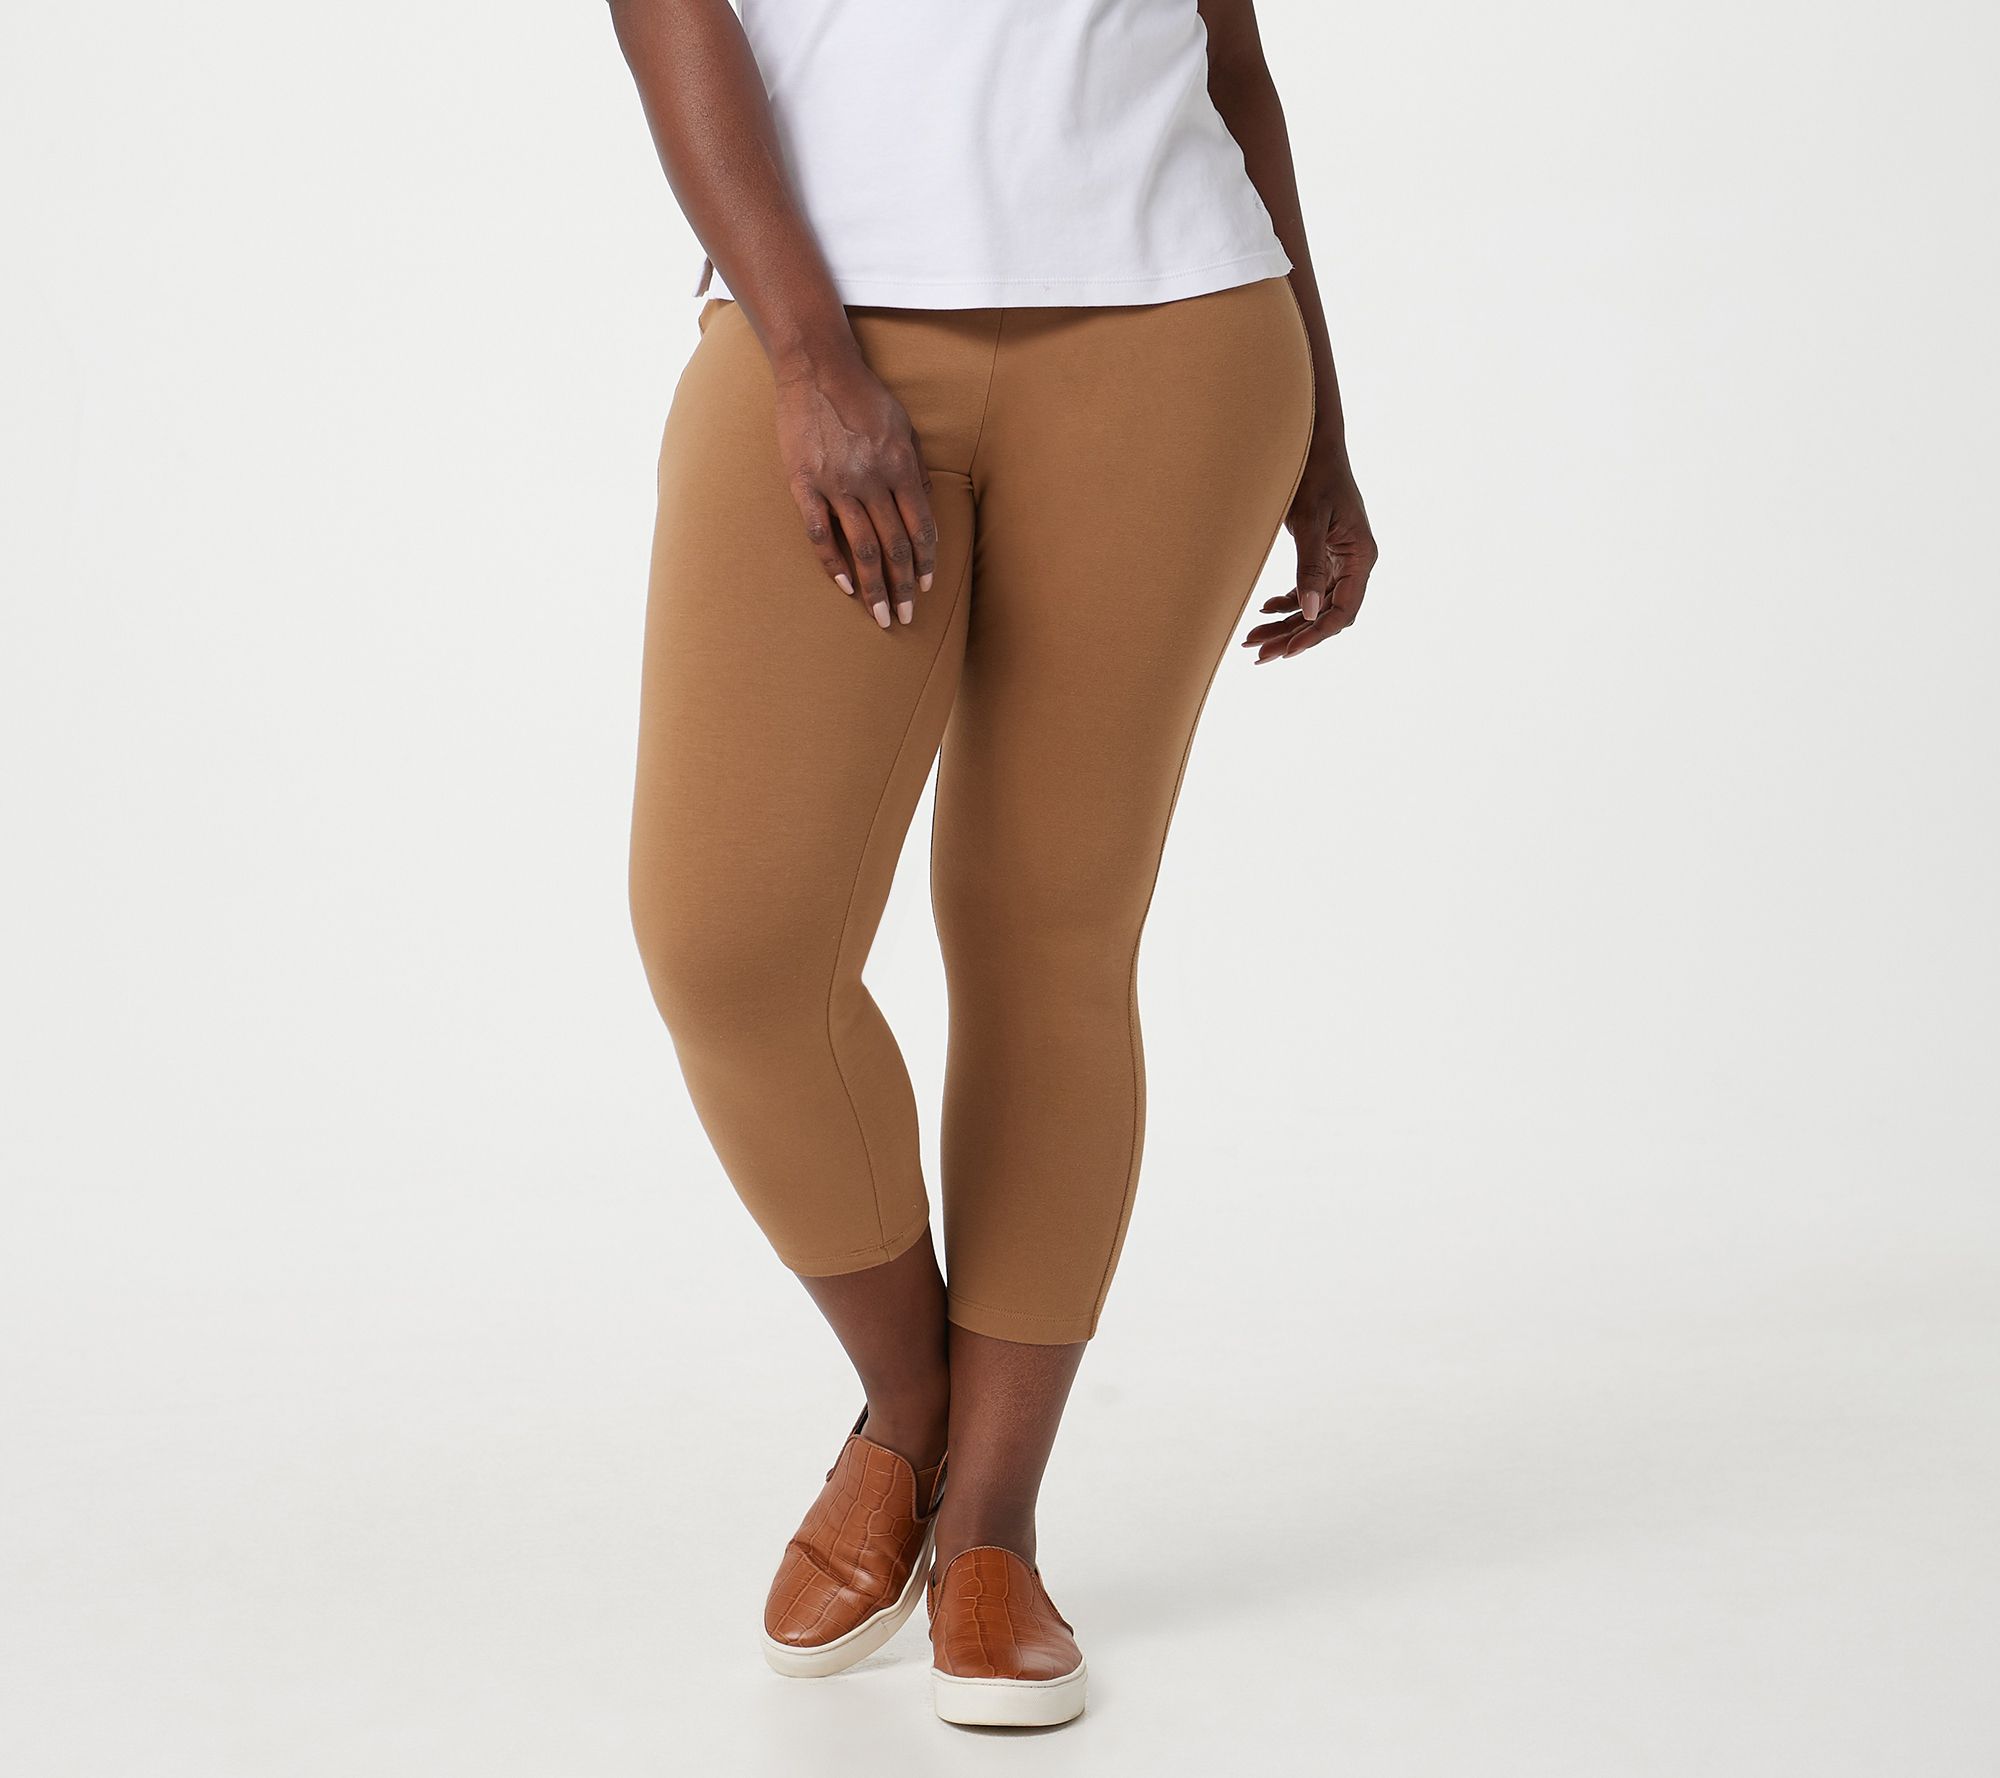 Buy Designers Resource light Beige colored leggings for women at